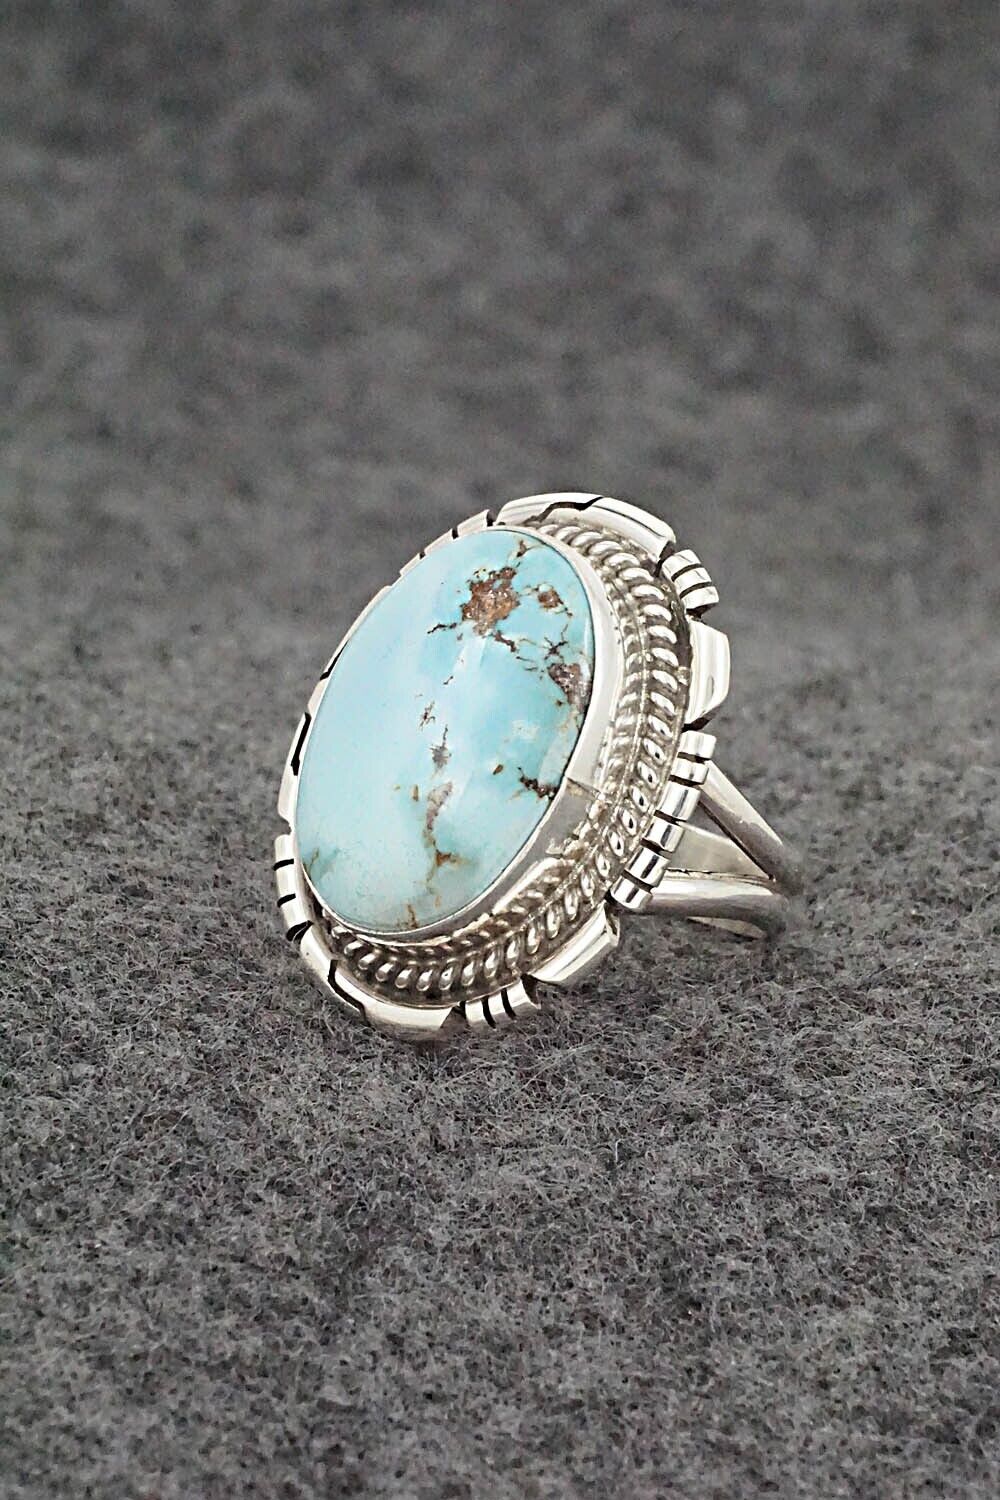 Turquoise & Sterling Silver Ring - Peggy Skeets - Size 7.5